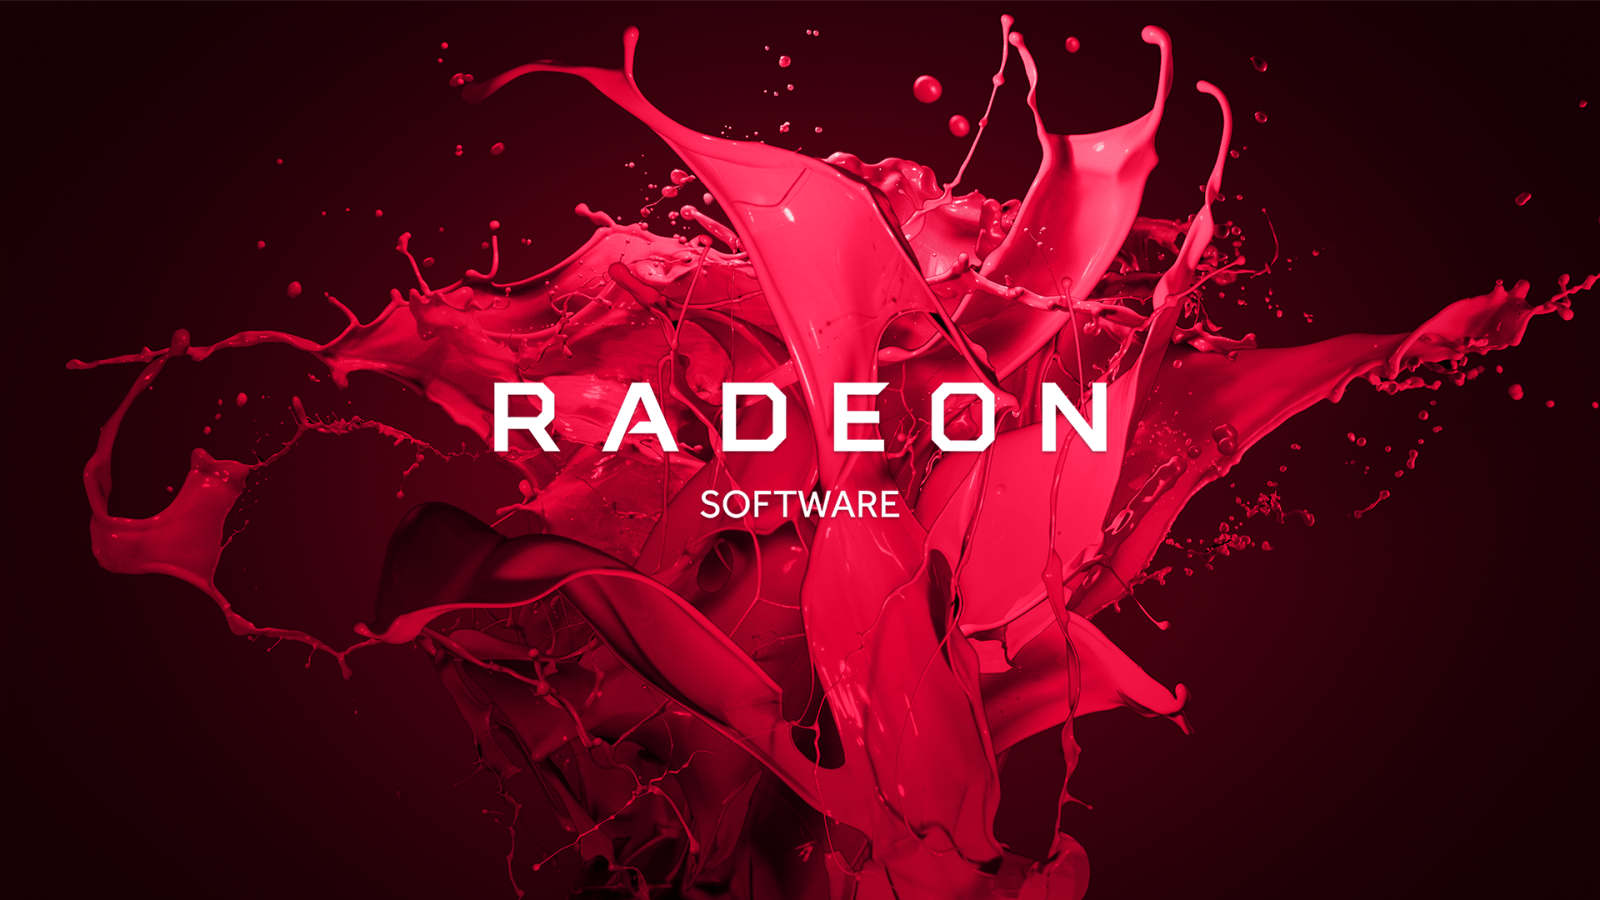 AMD's Radeon software update fixes stutter issues and offers reduced